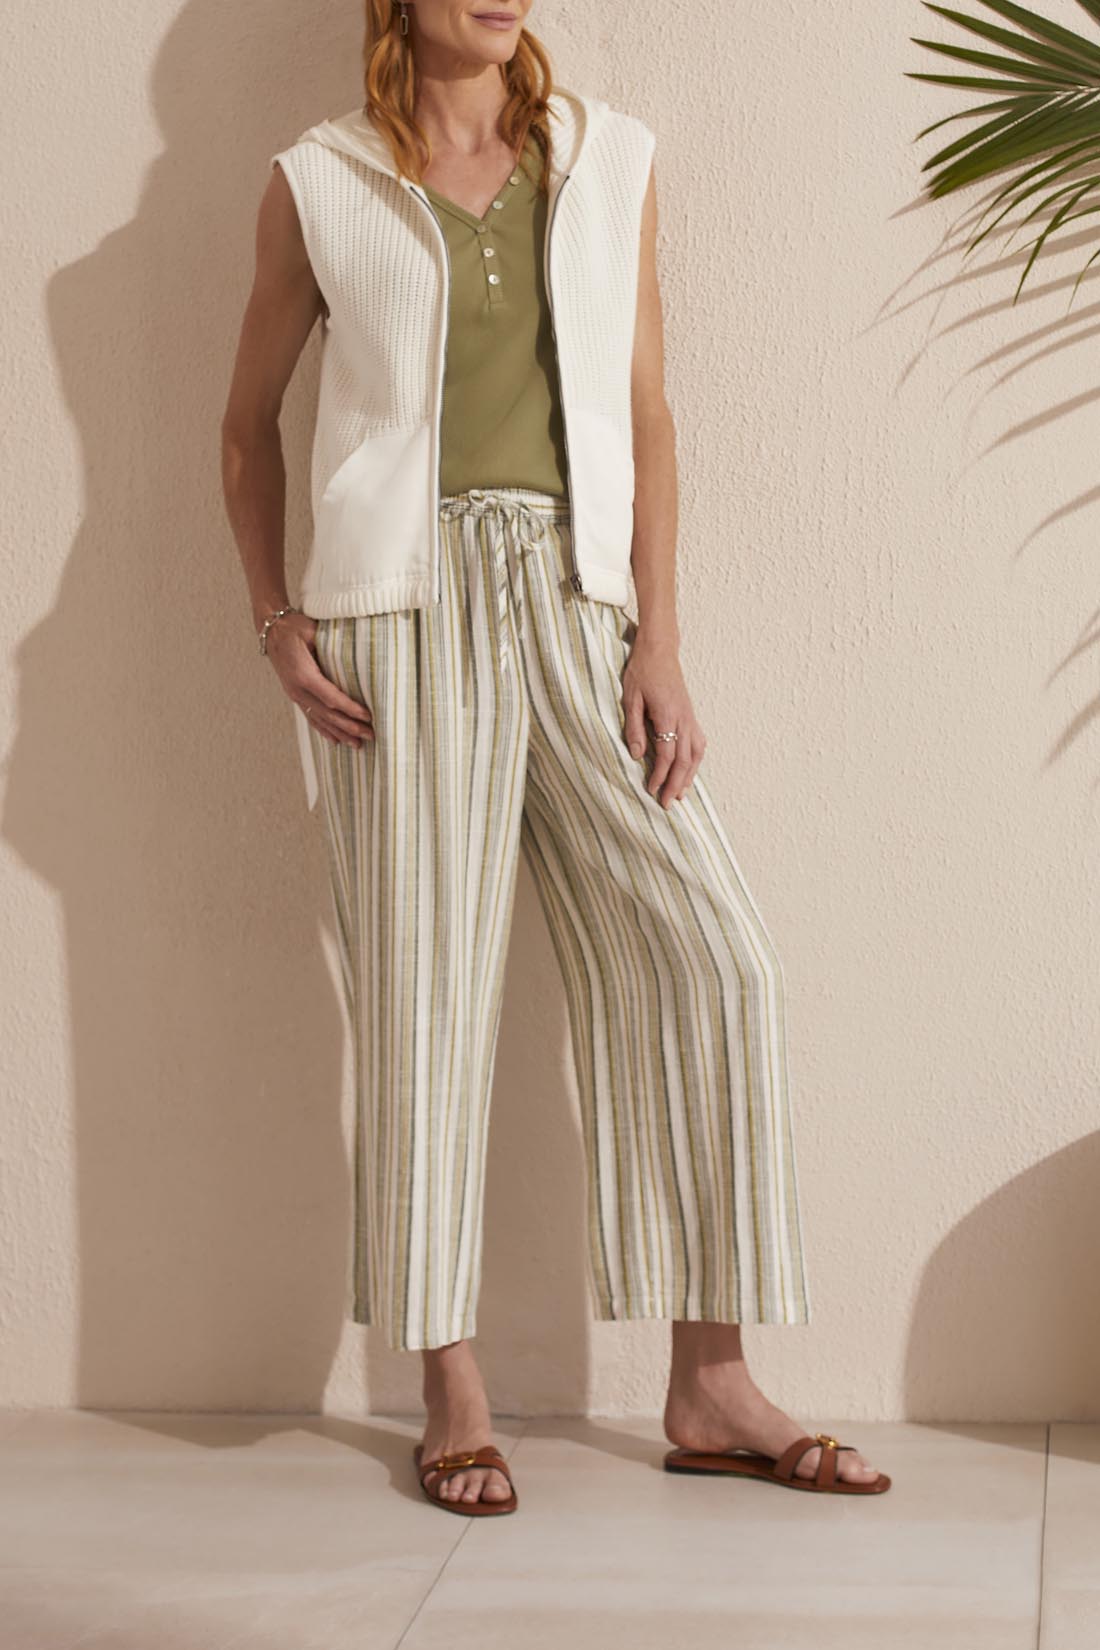 Pull On Flowy Crop Pant With Drawcord 7704O-4400